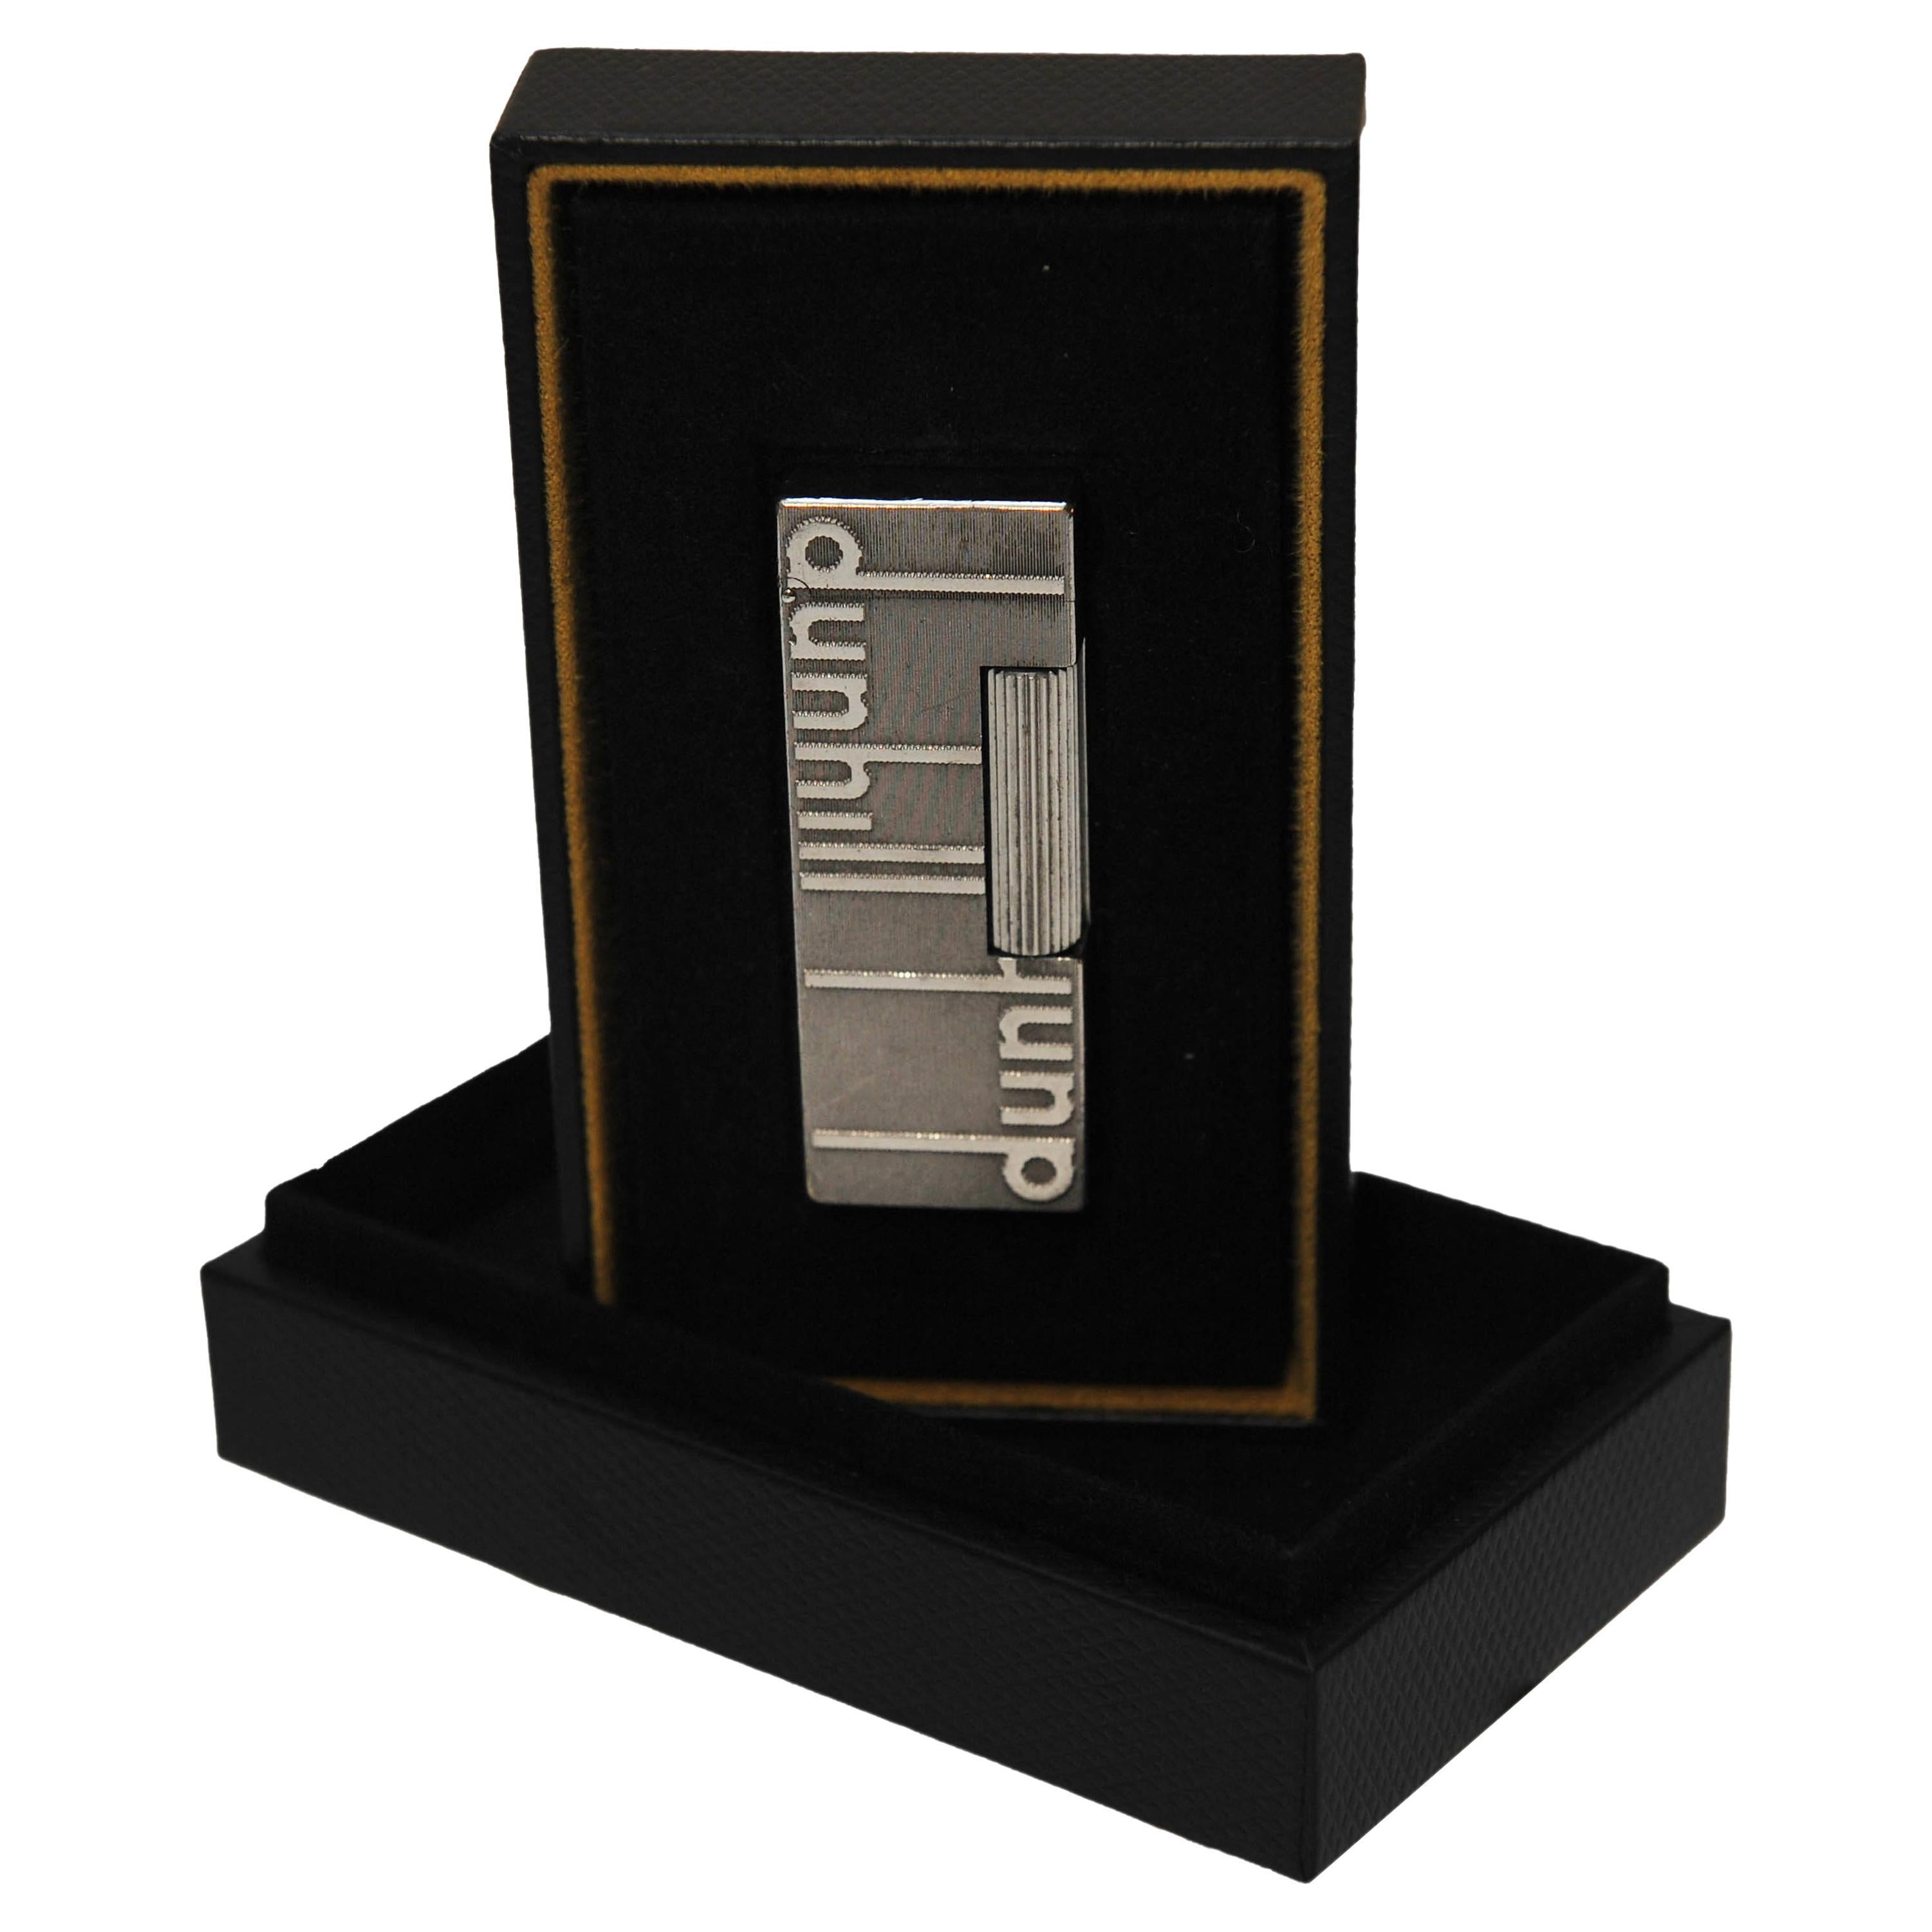 An Original Dunhill of London Longtail Logo Rollgas Cigarette Lighter With Guarantee Card and Original Dunhill Presentation Box.
Ideal Father's day, Christmas present etc

Inspired by the dunhill archive, a palladium-plated brass lighter featuring